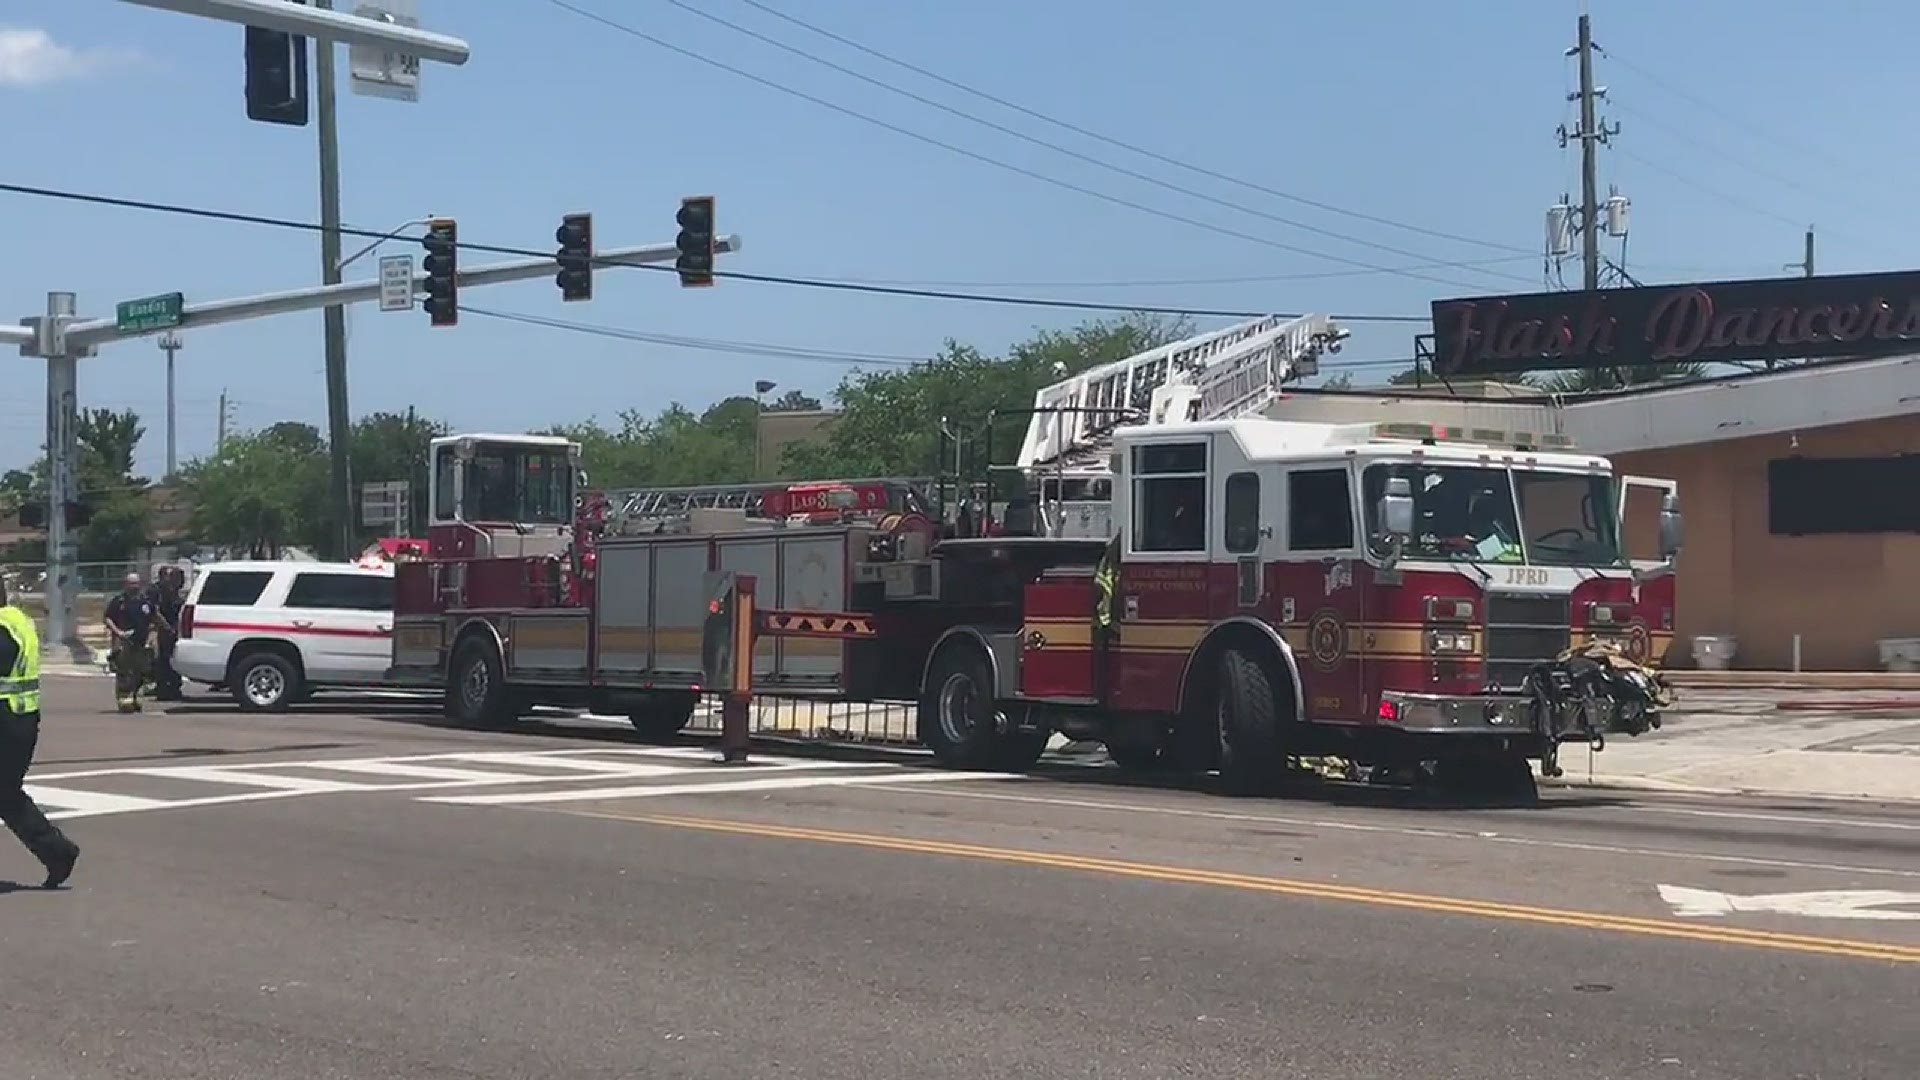 A fire started on the roof of Flash Dancers on Blanding Boulevard Monday afternoon, according to Jacksonville Fire Rescue Department. No one was hurt.
Credit: Mike Bunker